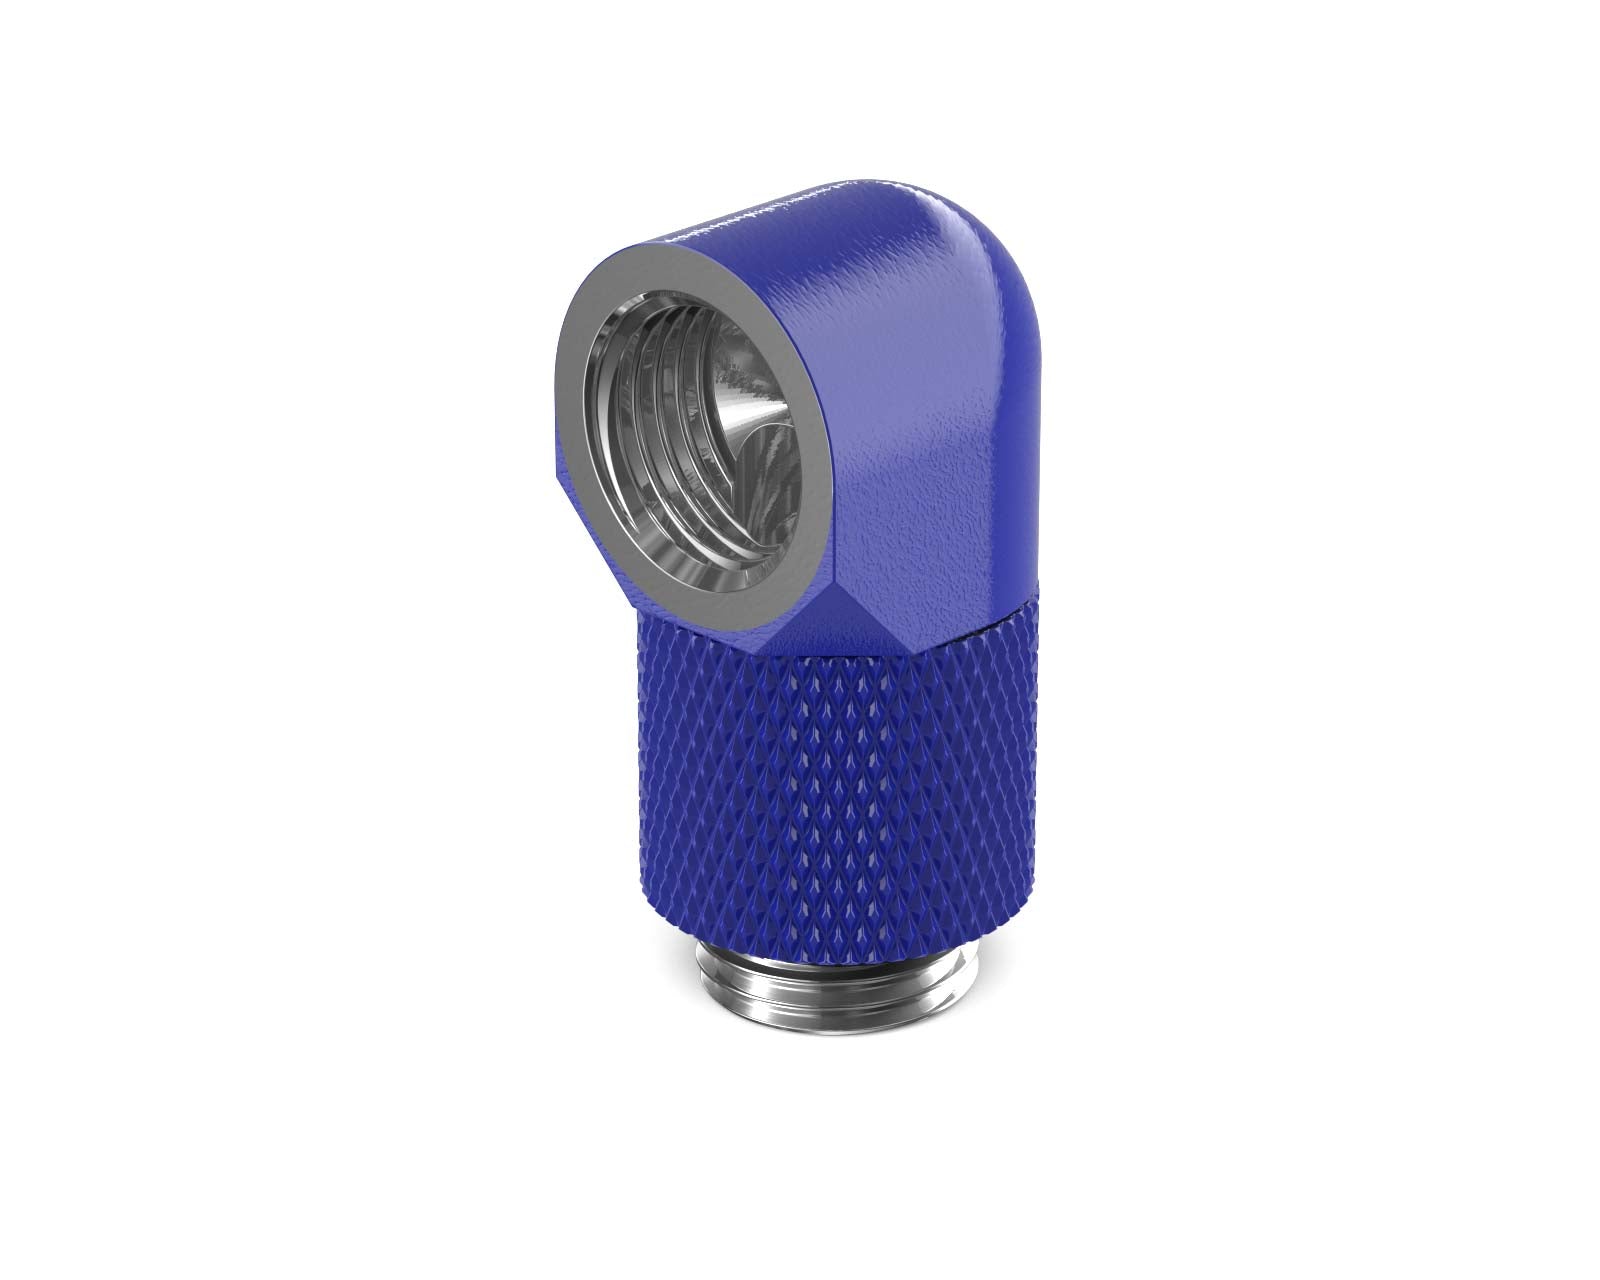 PrimoChill Male to Female G 1/4in. 90 Degree SX Rotary 15mm Extension Elbow Fitting - PrimoChill - KEEPING IT COOL True Blue